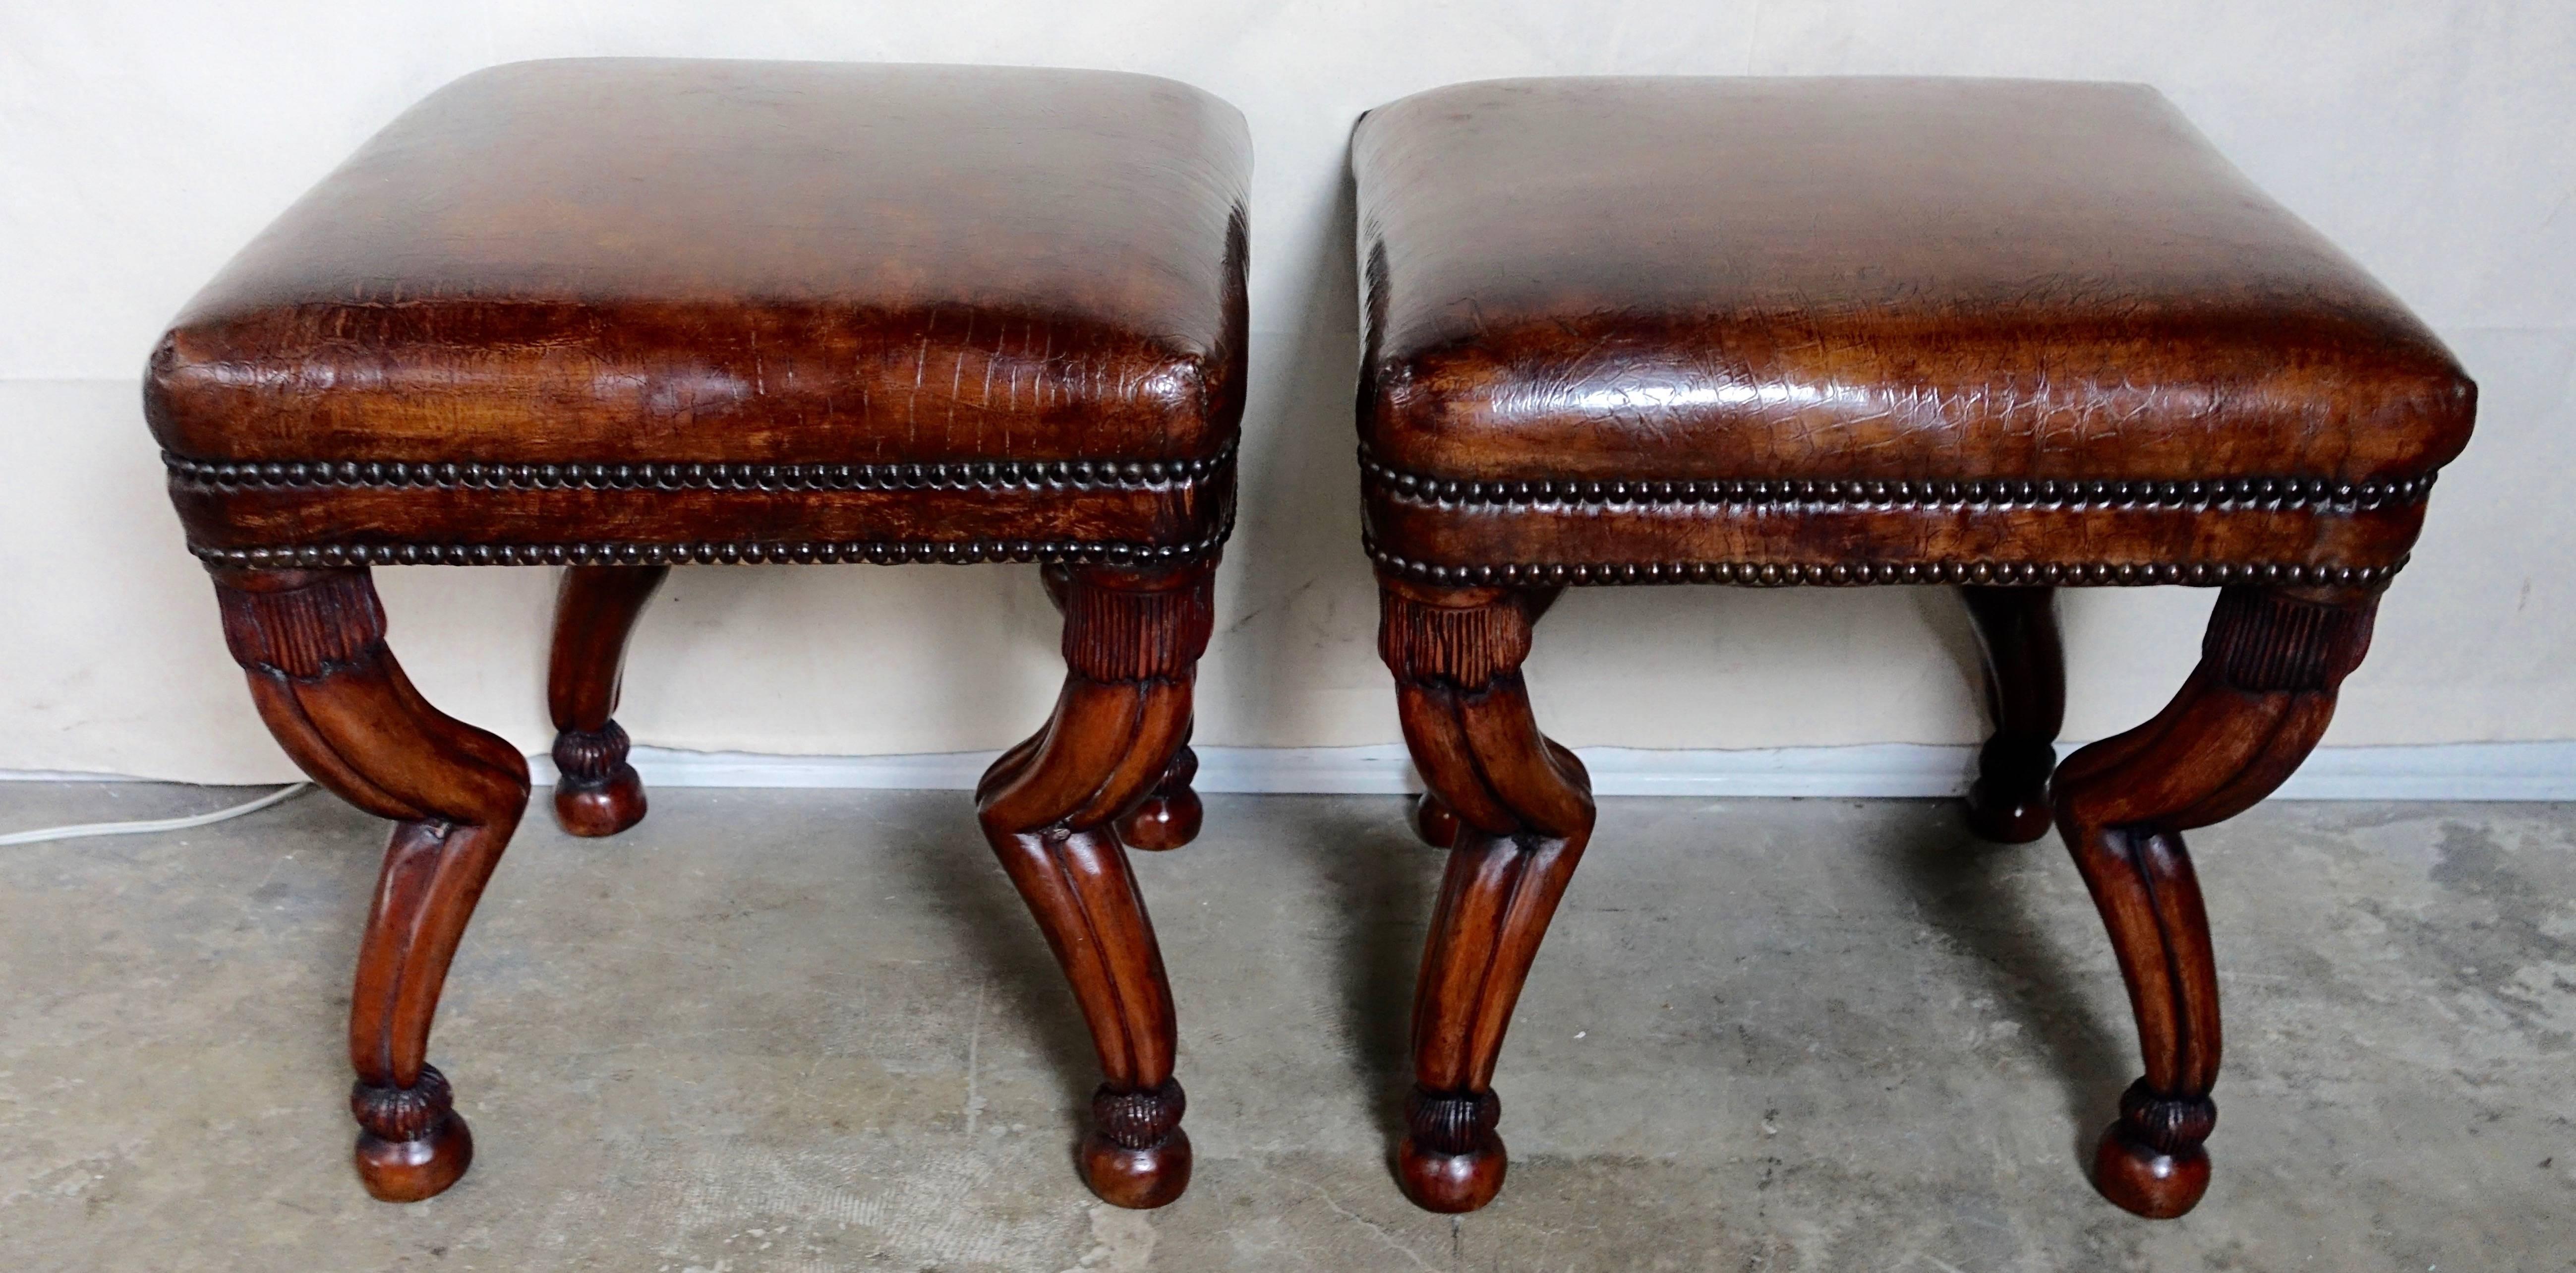 Pair of custom tobacco colored benches made with four hand-carved gazelle style legs upholstered with leather that is embossed with a crocodile pattern. The benches are finished with two rows of nailheads.